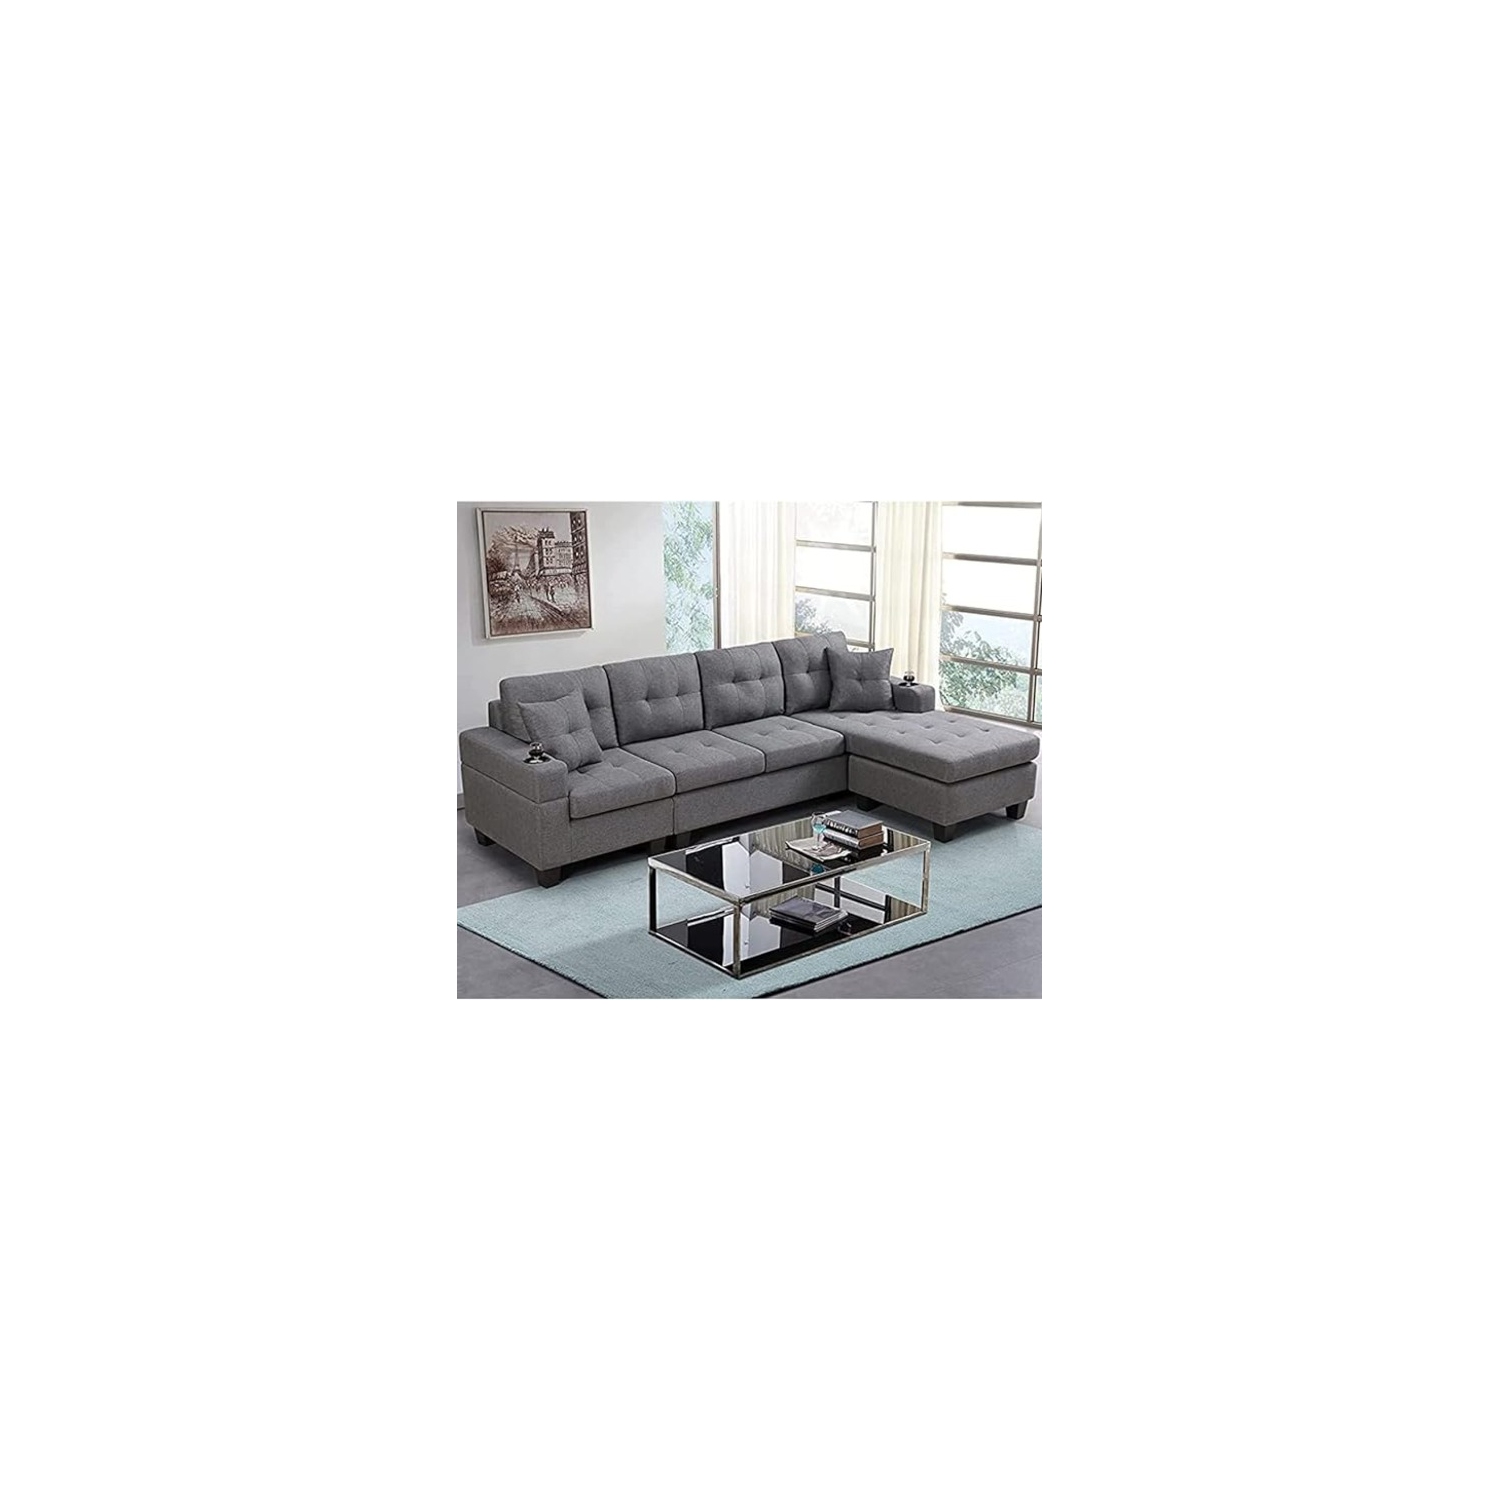 Queensons Uptown Sectional Sofa Grey